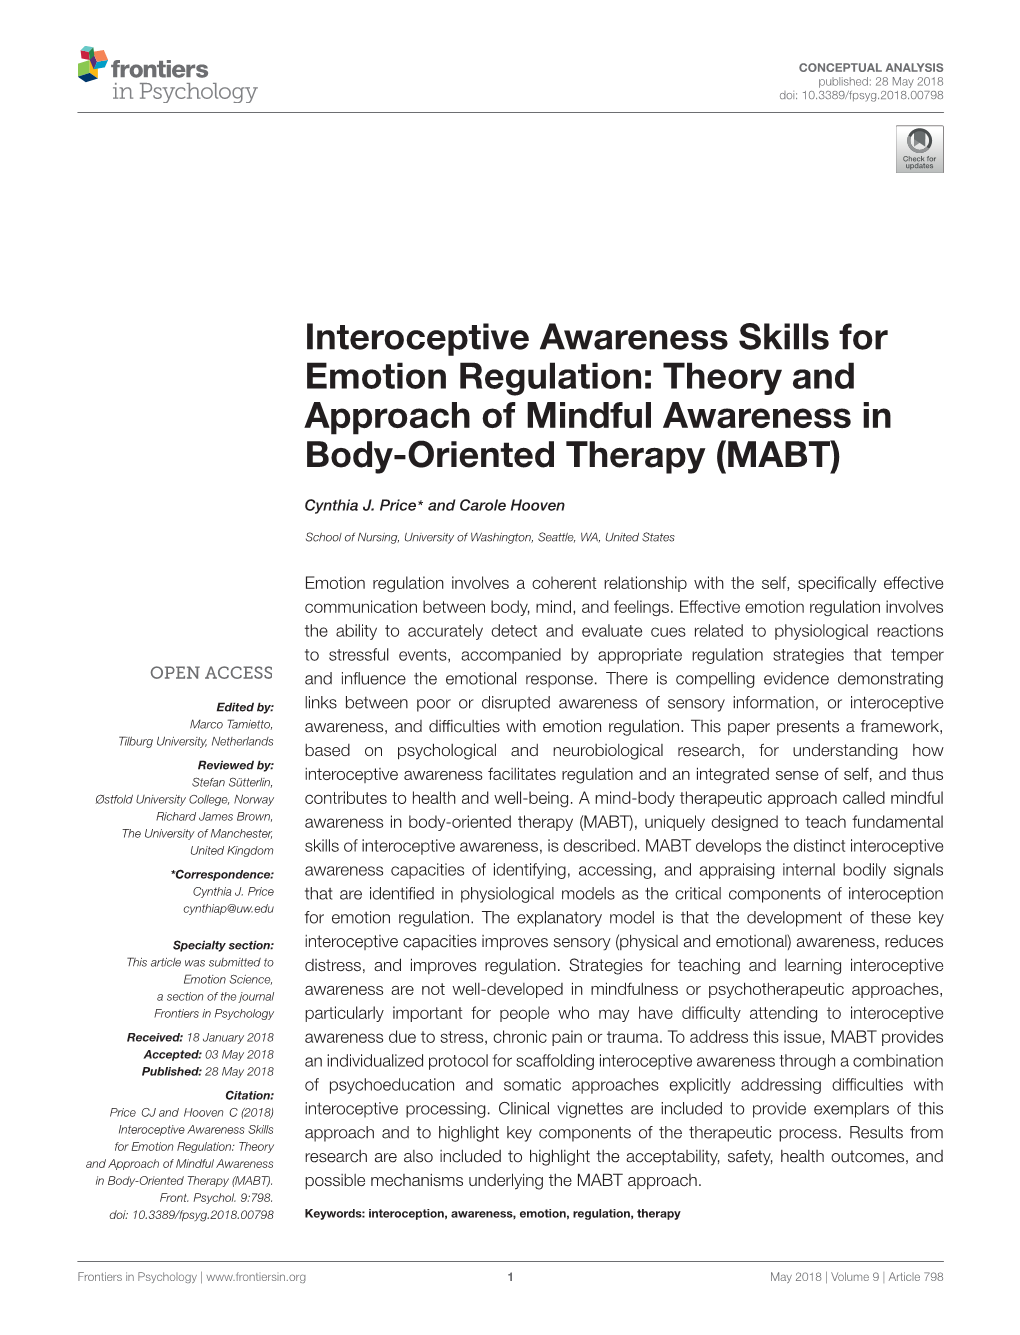 Interoceptive Awareness Skills for Emotion Regulation: Theory and Approach of Mindful Awareness in Body-Oriented Therapy (MABT)